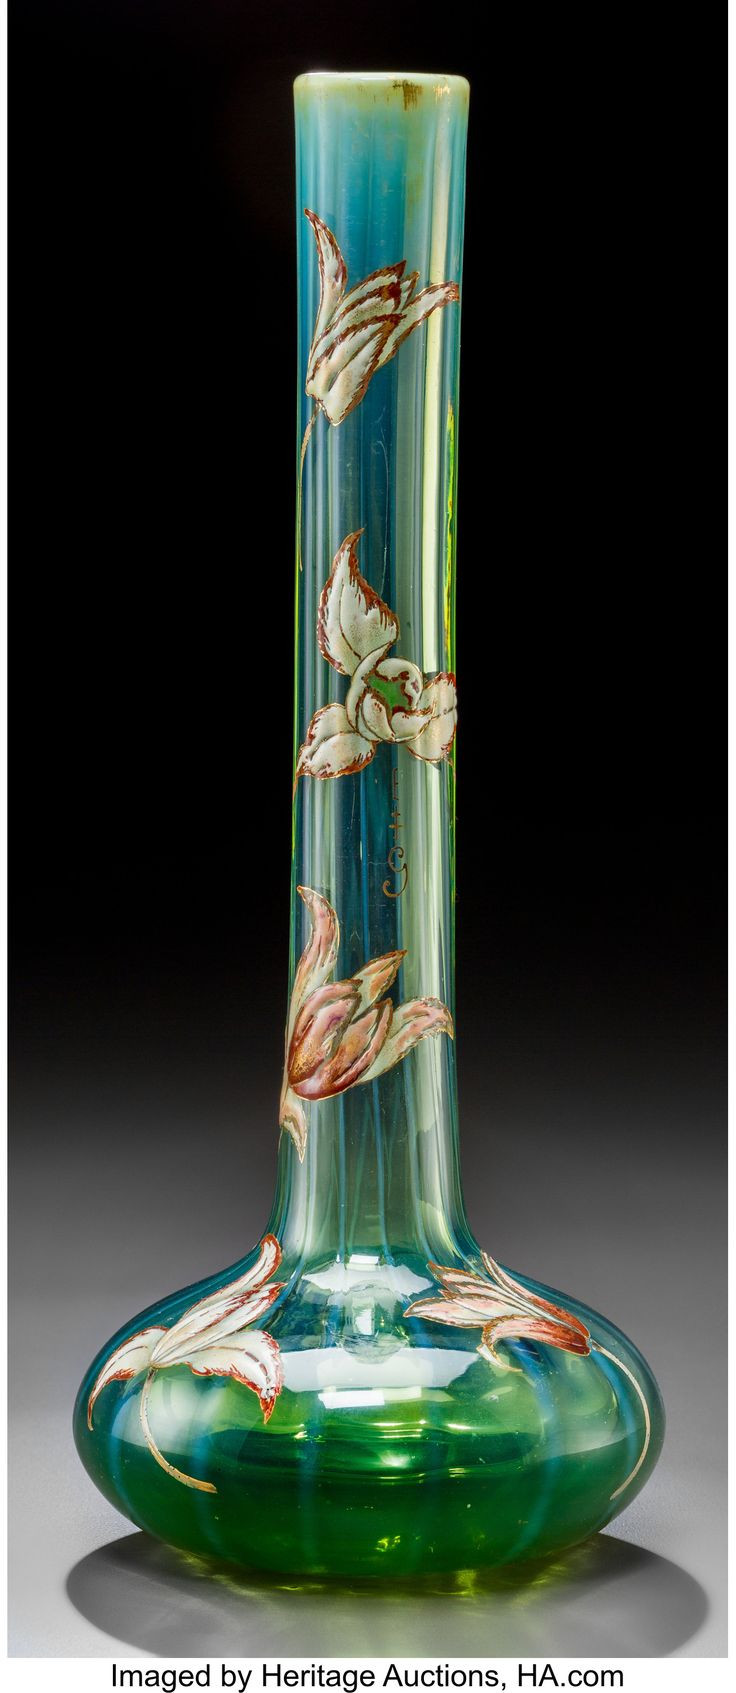 10 attractive Clear Barcelona Vases 2024 free download clear barcelona vases of 11474 best glassy images on pinterest glass art crystals and inside tall galla opalescent green glass vase with enameled lilies lot 79102 heritage